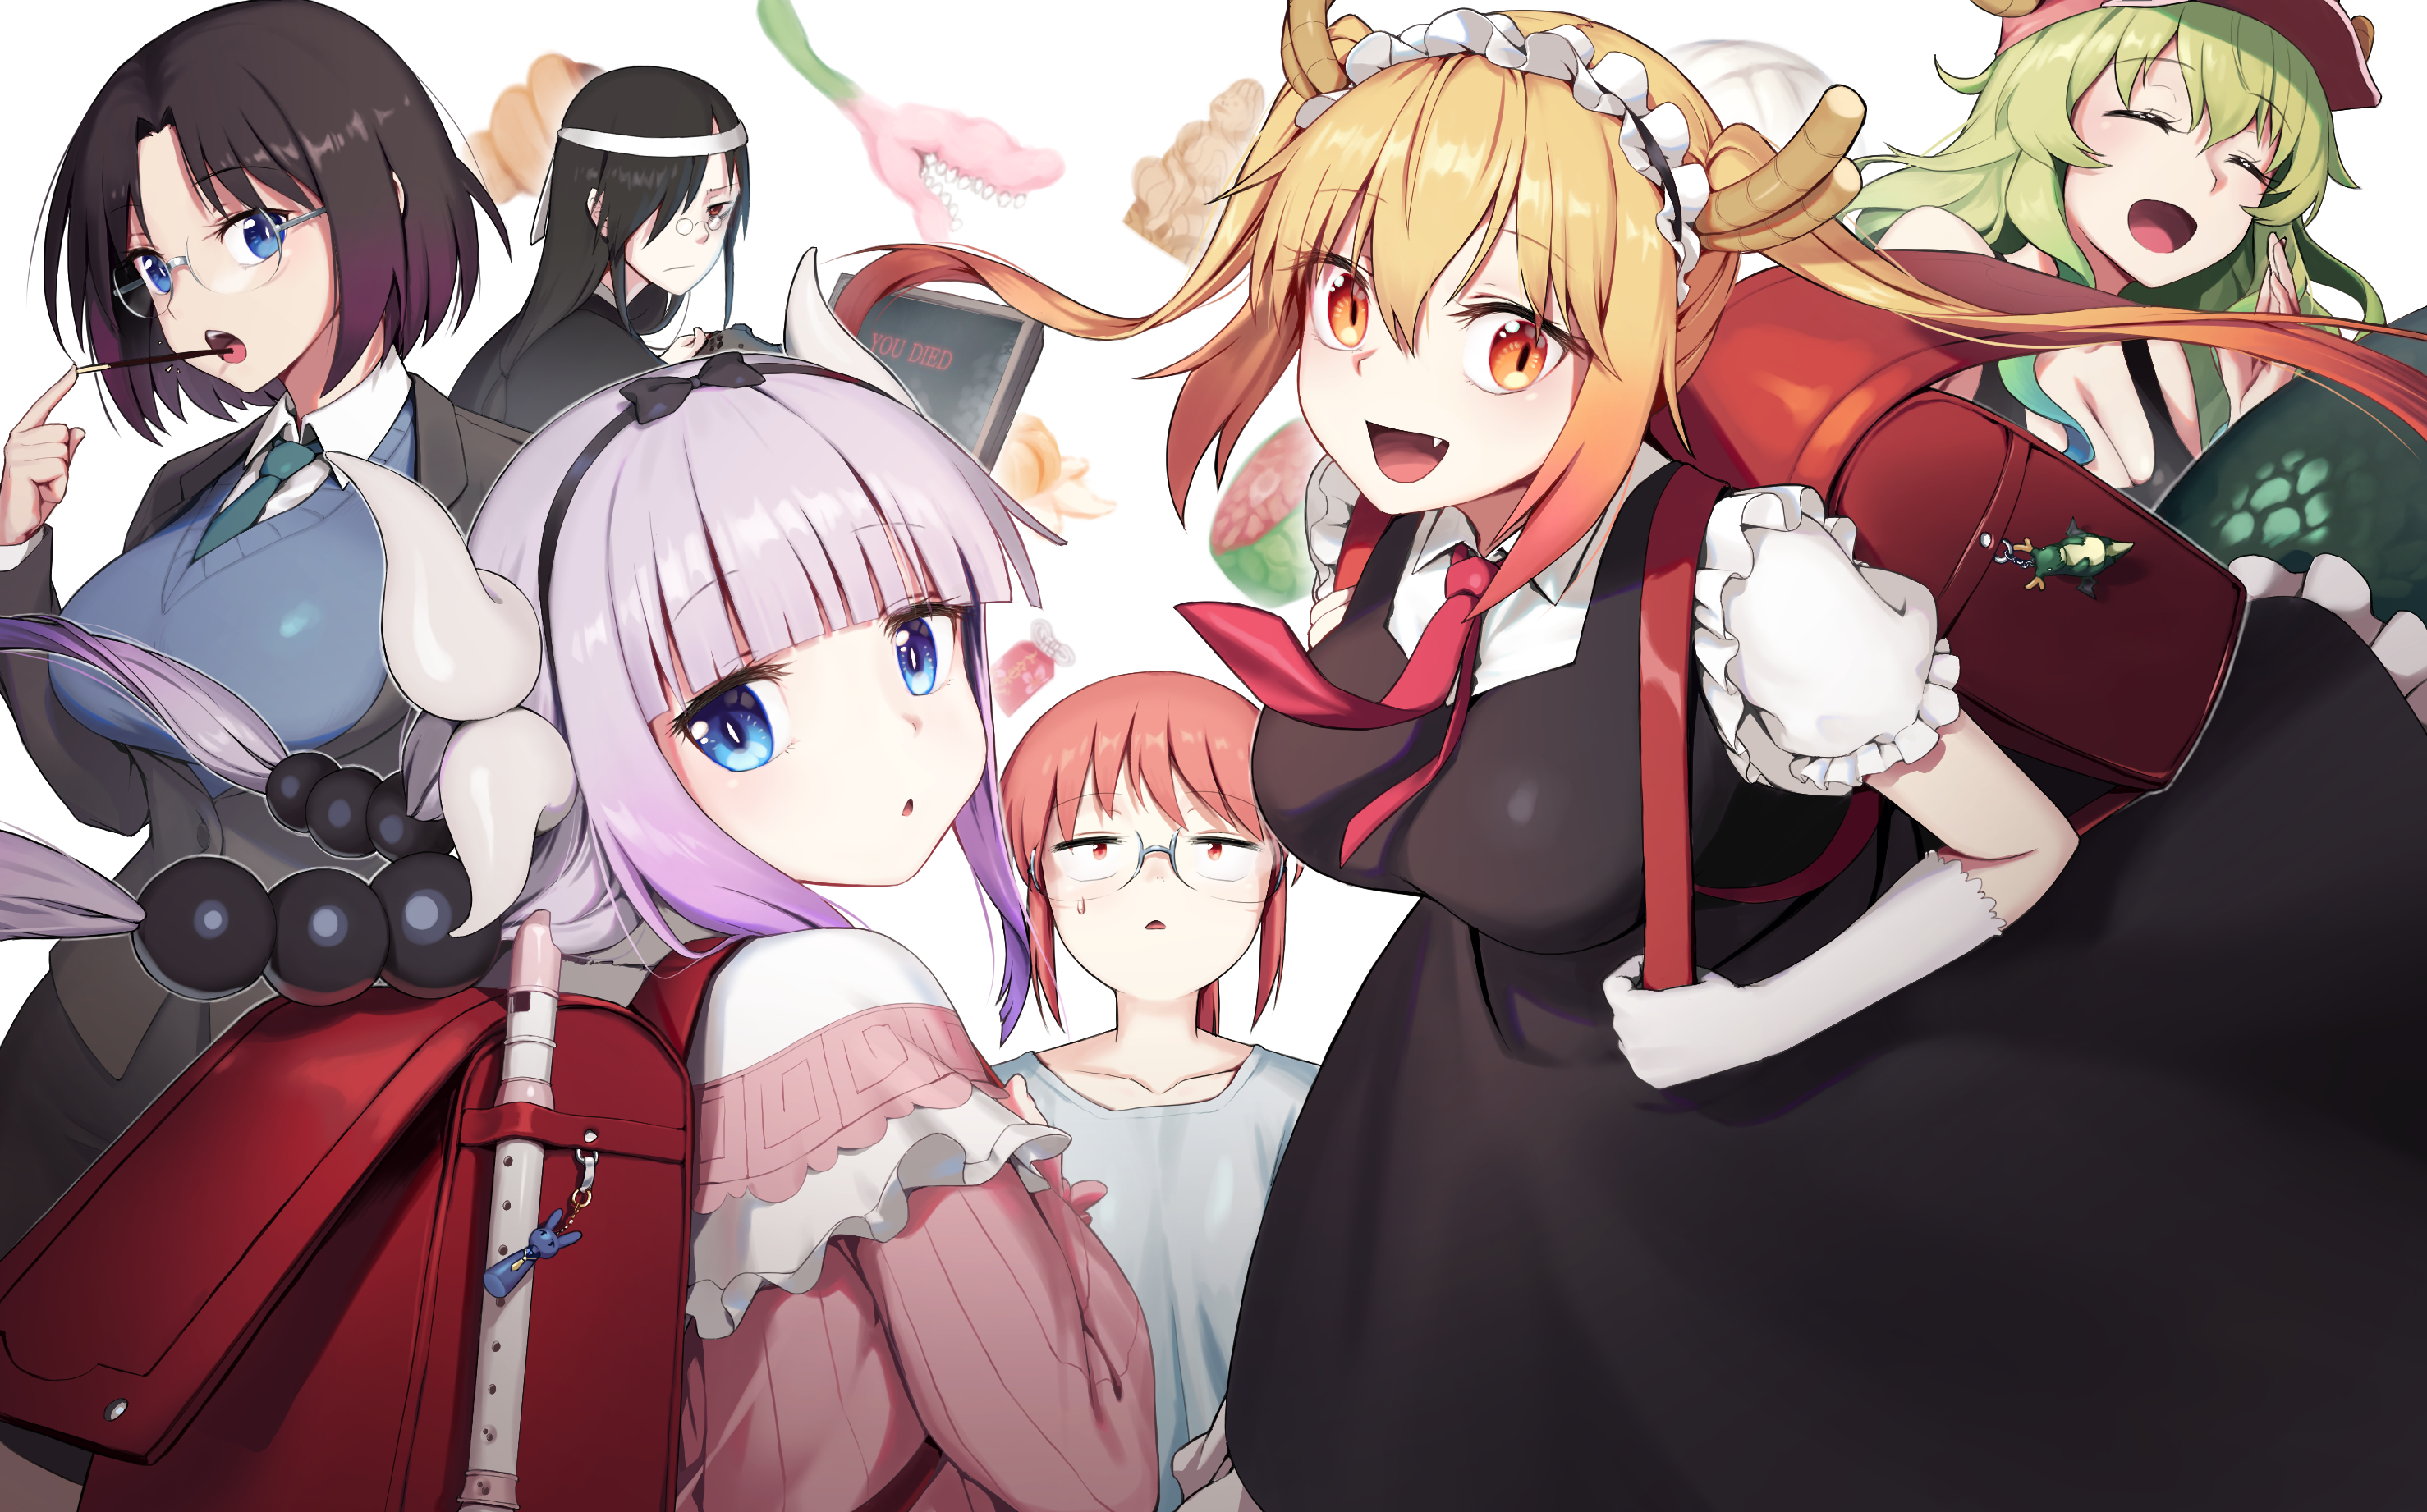 Anime 2956x1842 anime anime girls Tohru (Kobayashi-san Chi no Maid Dragon) Kanna Kamui (Kobayashi-san Chi no Maid Dragon) Lucoa (Kobayashi-san Chi no Maid Dragon) Kobayashi-san Chi no Maid Dragon Kobayashi (Kobayashi-san Chi no Maid Dragon) Fafnir (Kobayashi-san Chi no Maid Dragon) Elma Jouii (Kobayashi-San Chi no Maid Dragon) 2D drawing digital art blonde twintails long hair brown eyes maid horns maid outfit dragon girl redhead glasses tail red tie group of women blue eyes black hair pink hair multi-colored hair brunette green hair open mouth white background blunt bangs bob hairstyle wavy hair straight hair schoolbags